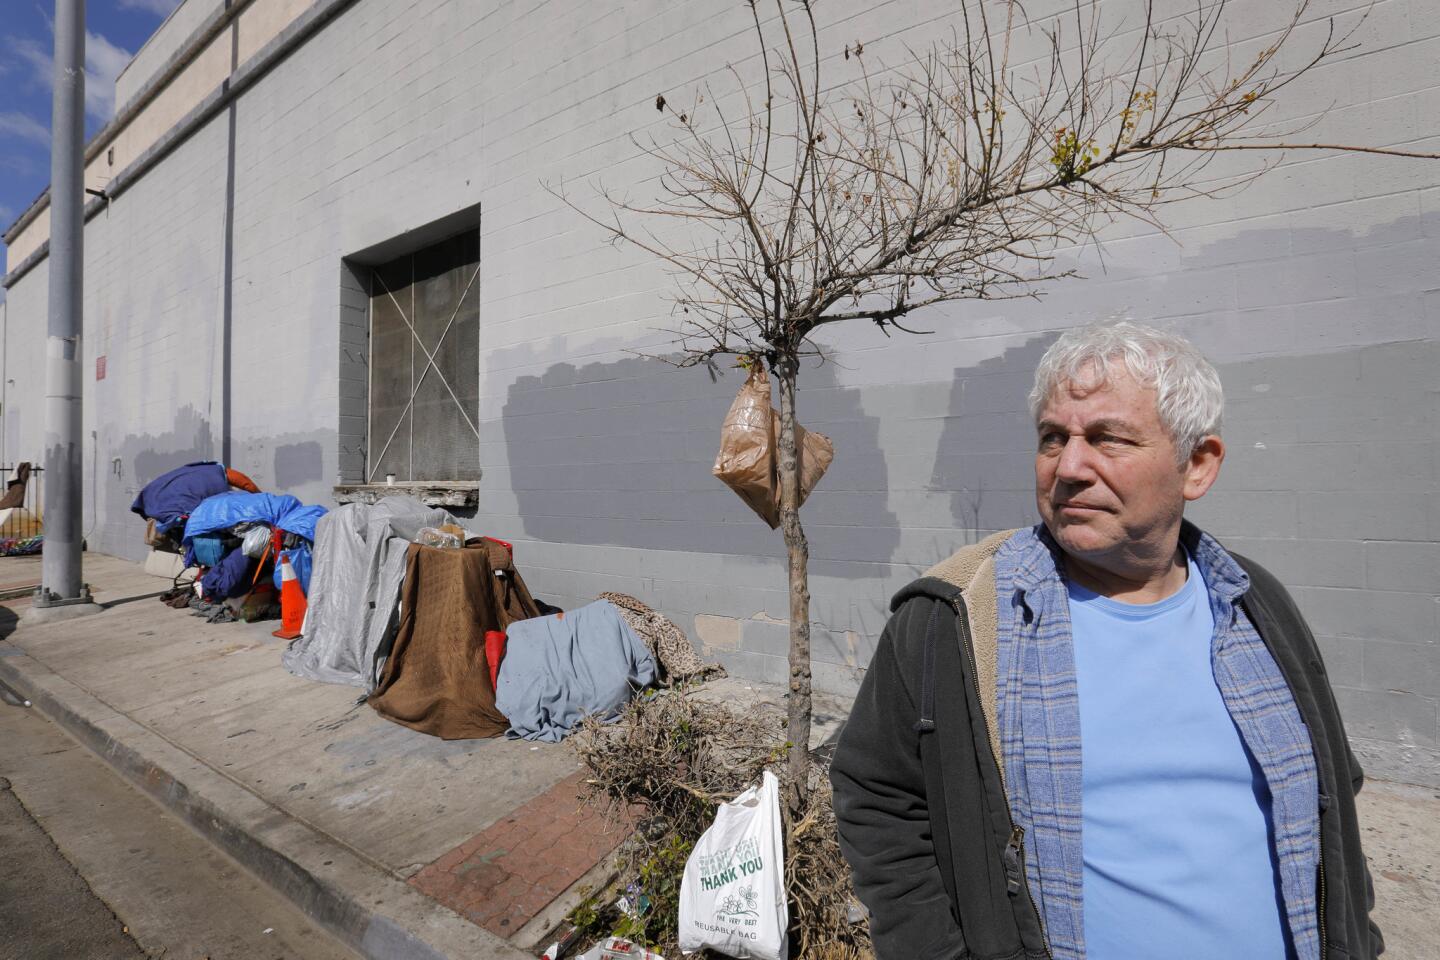 Business owners and residents concerned over proposed storage facility for homeless